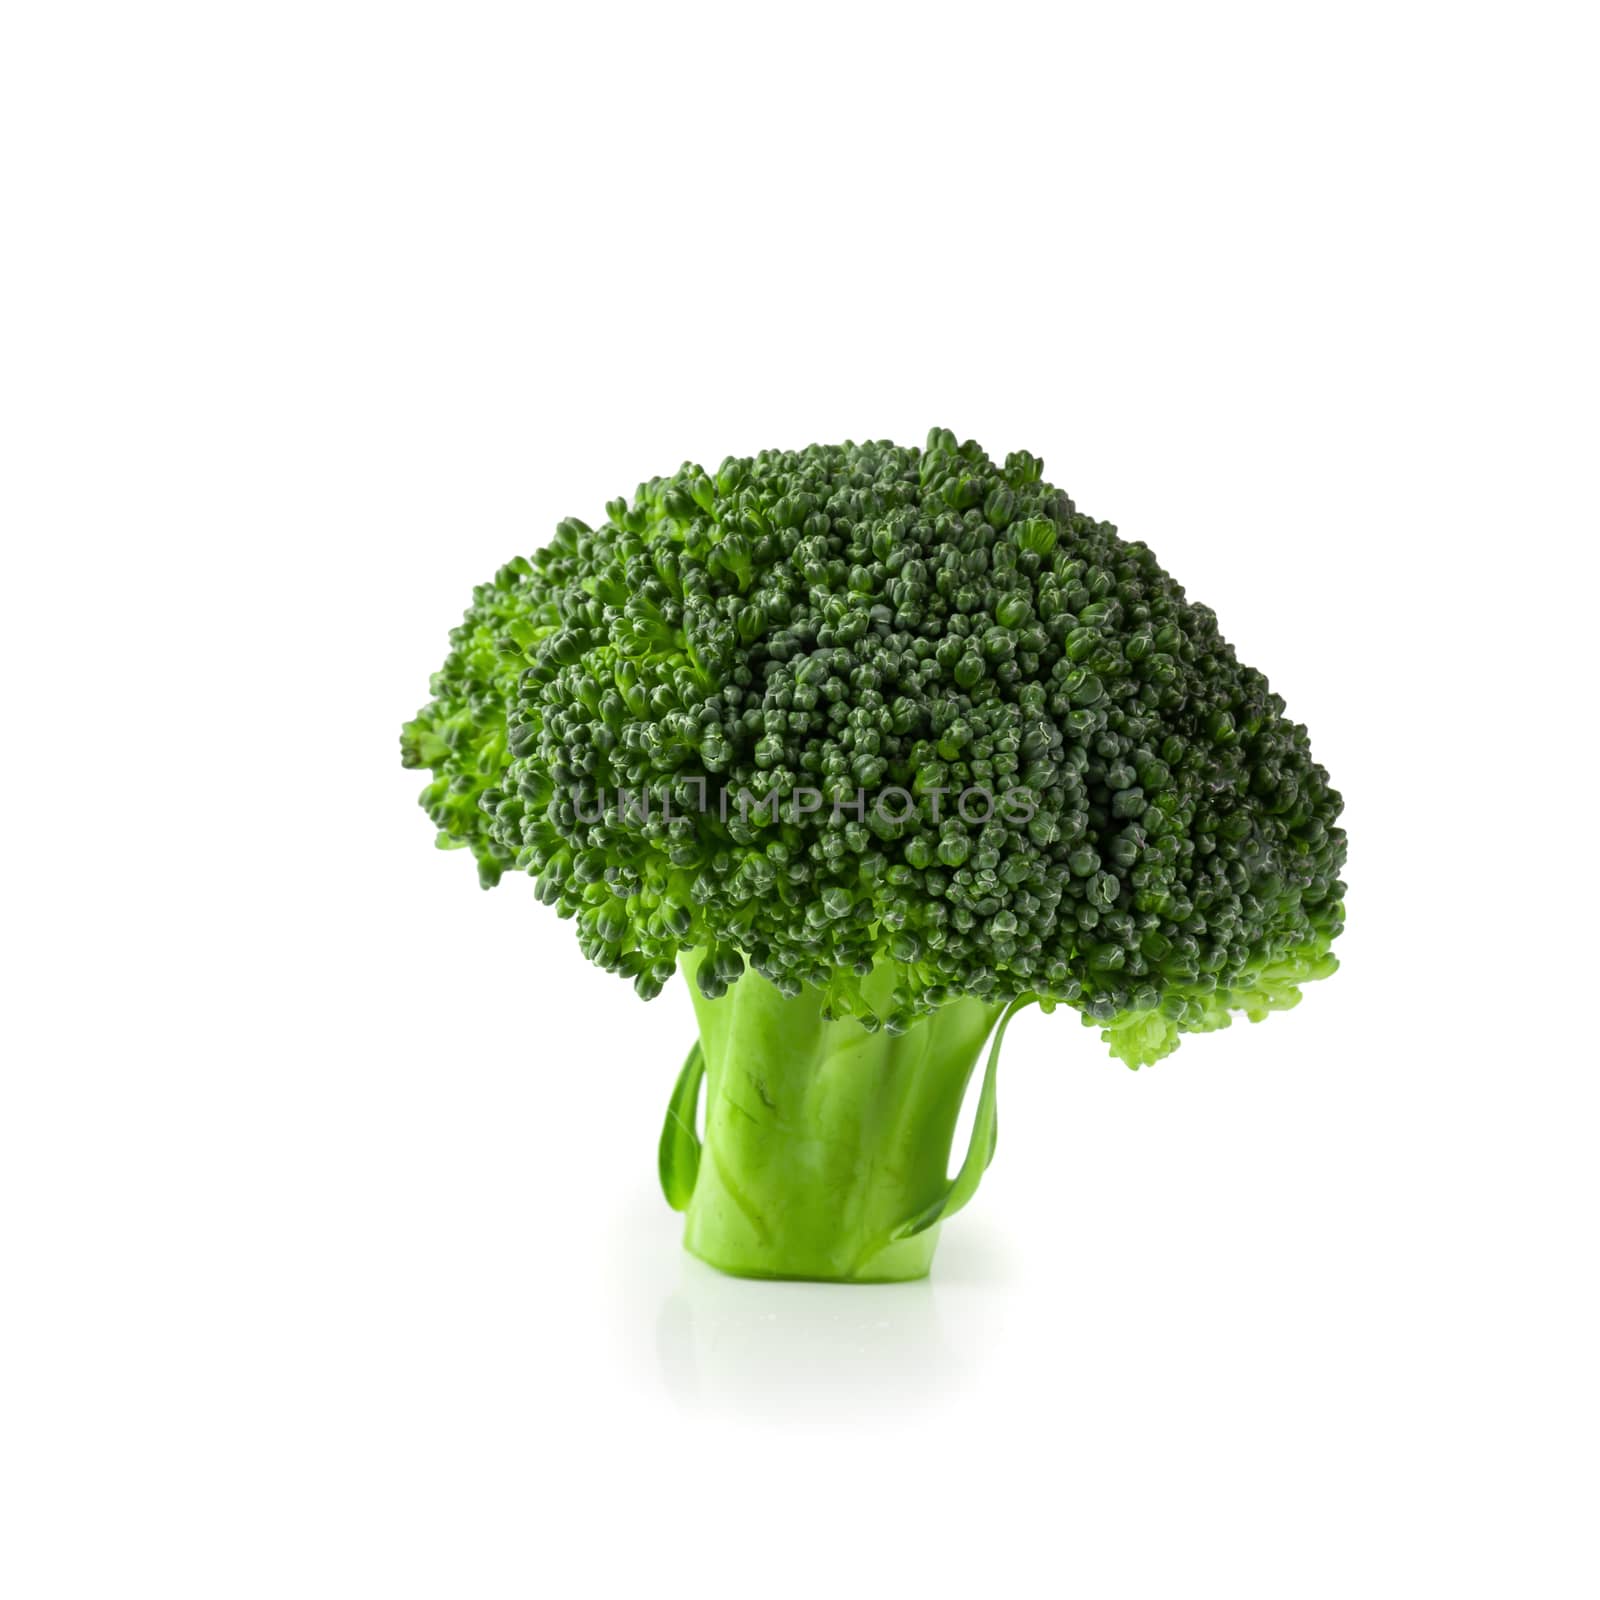 Fresh broccoli blocks for cooking isolated on white background.